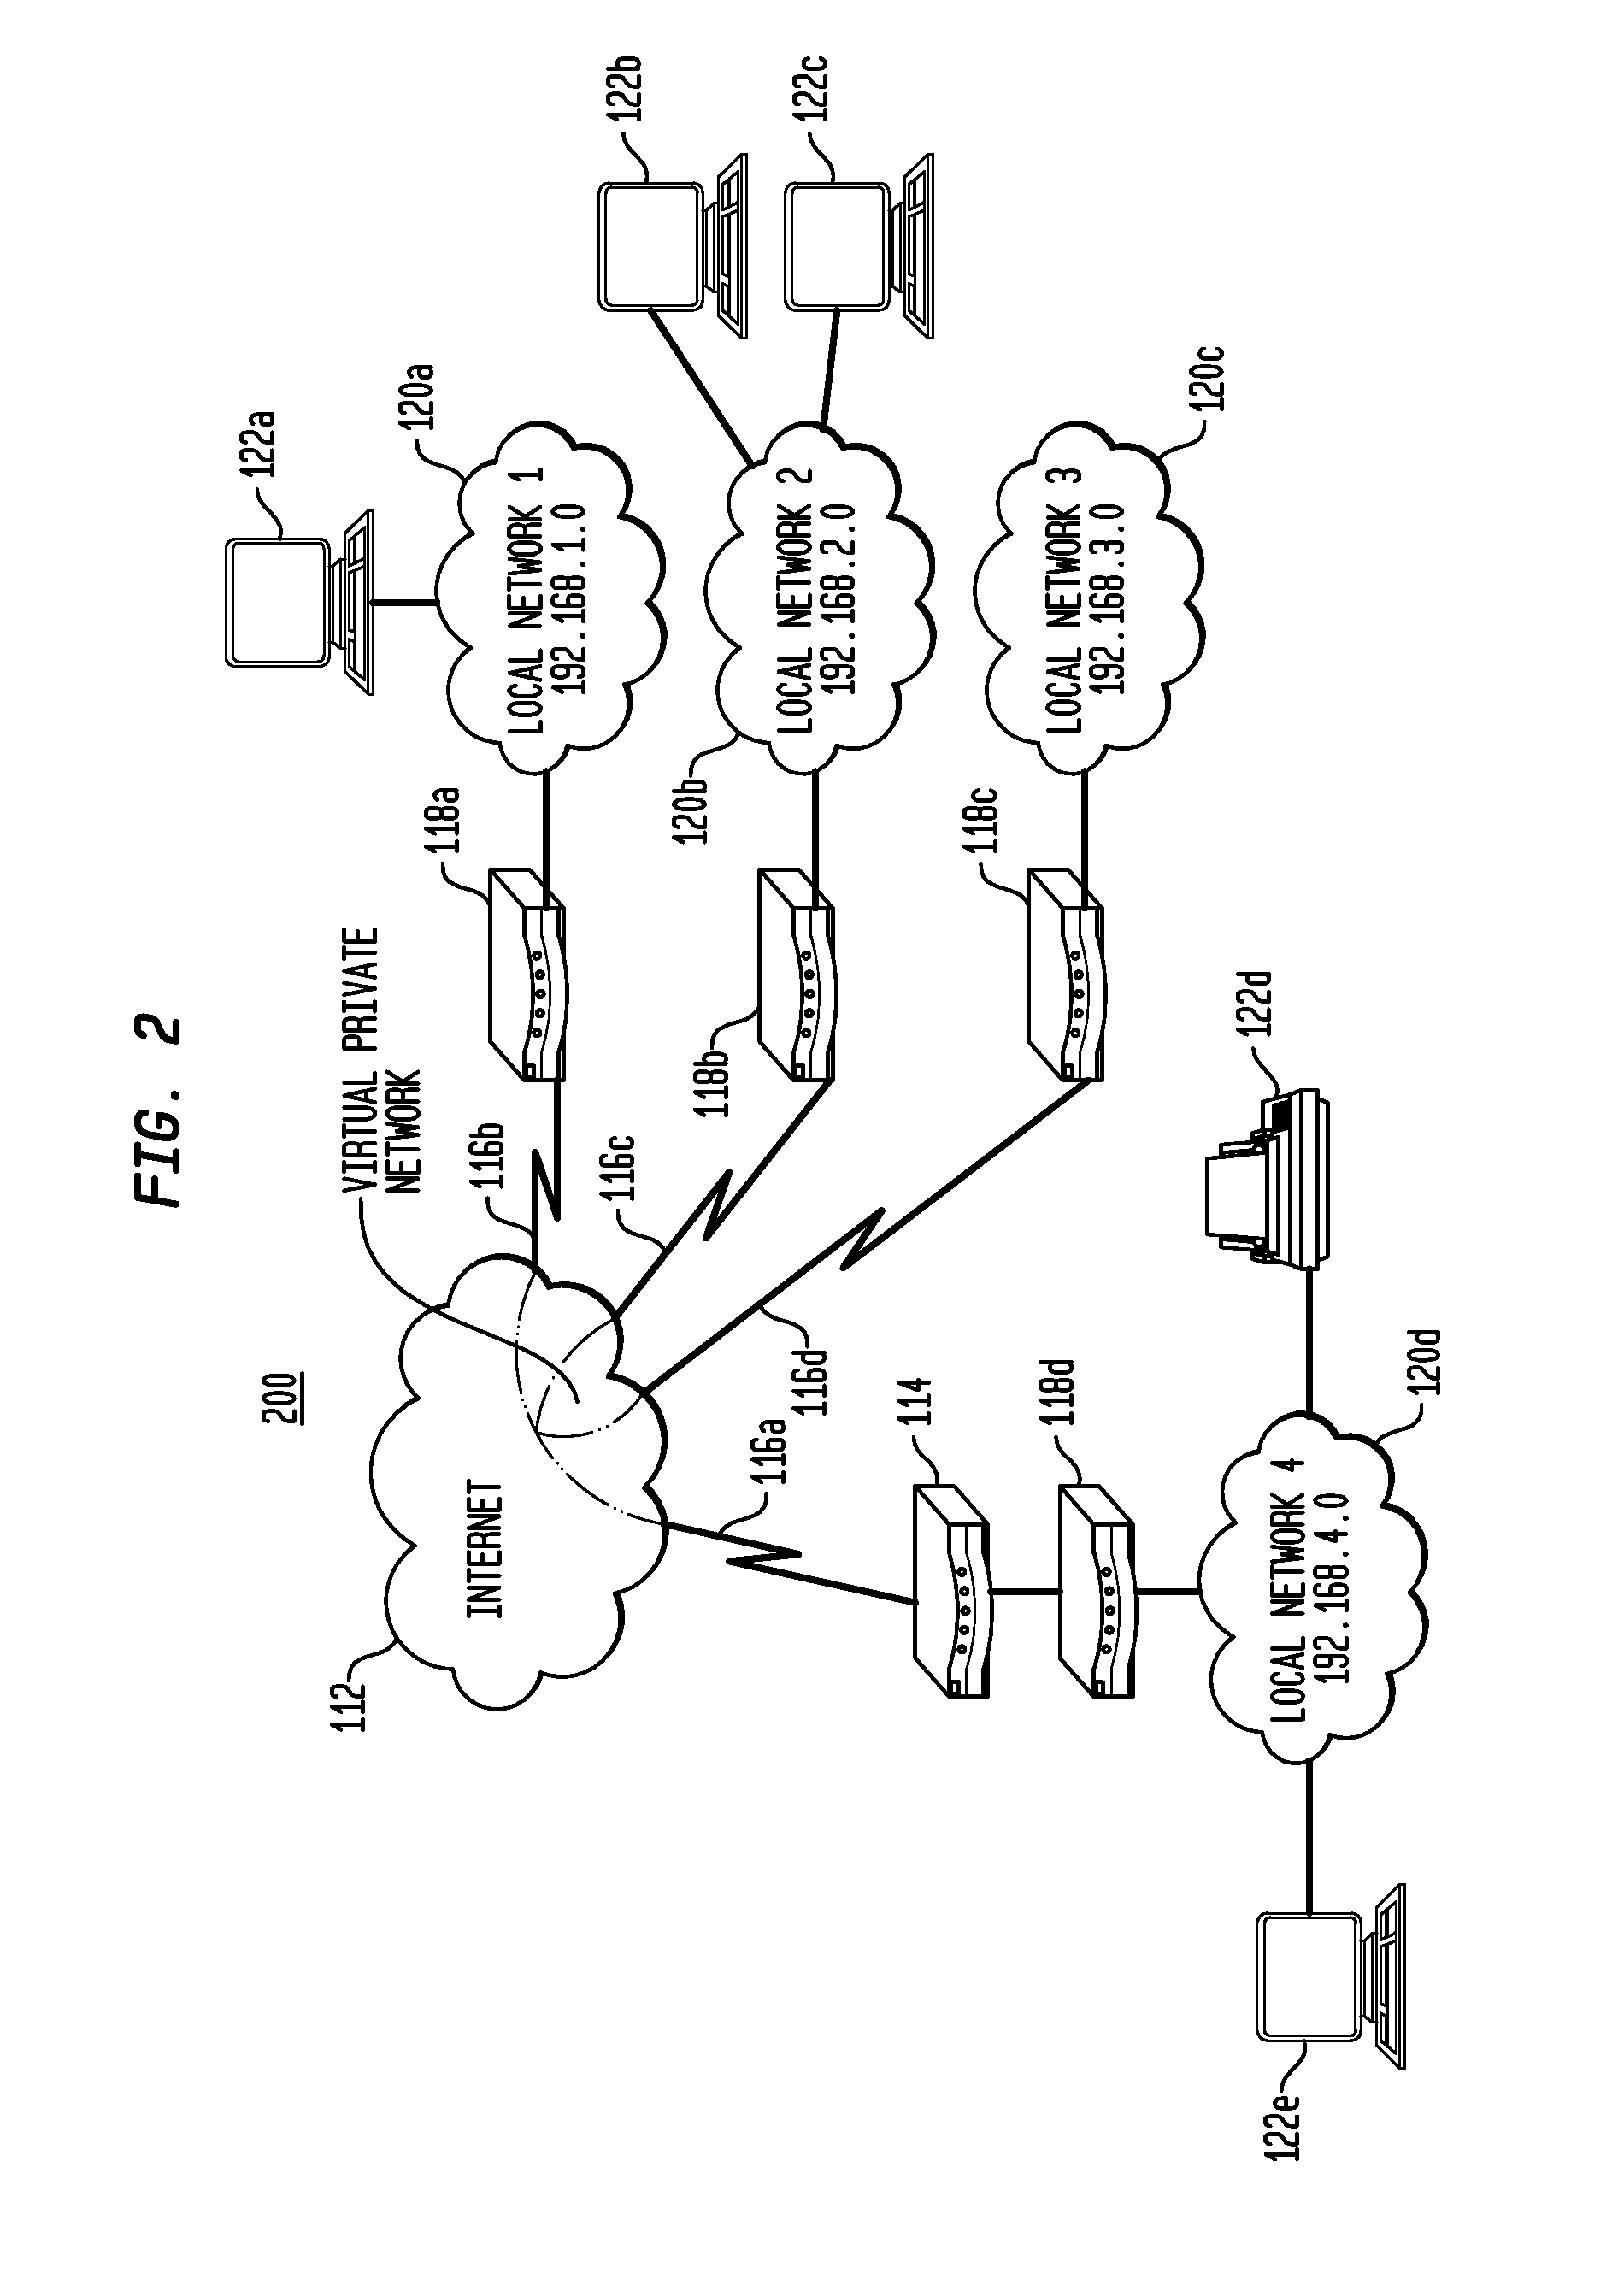 Systems and Methods for Remotely Maintaining Virtual Private Networks